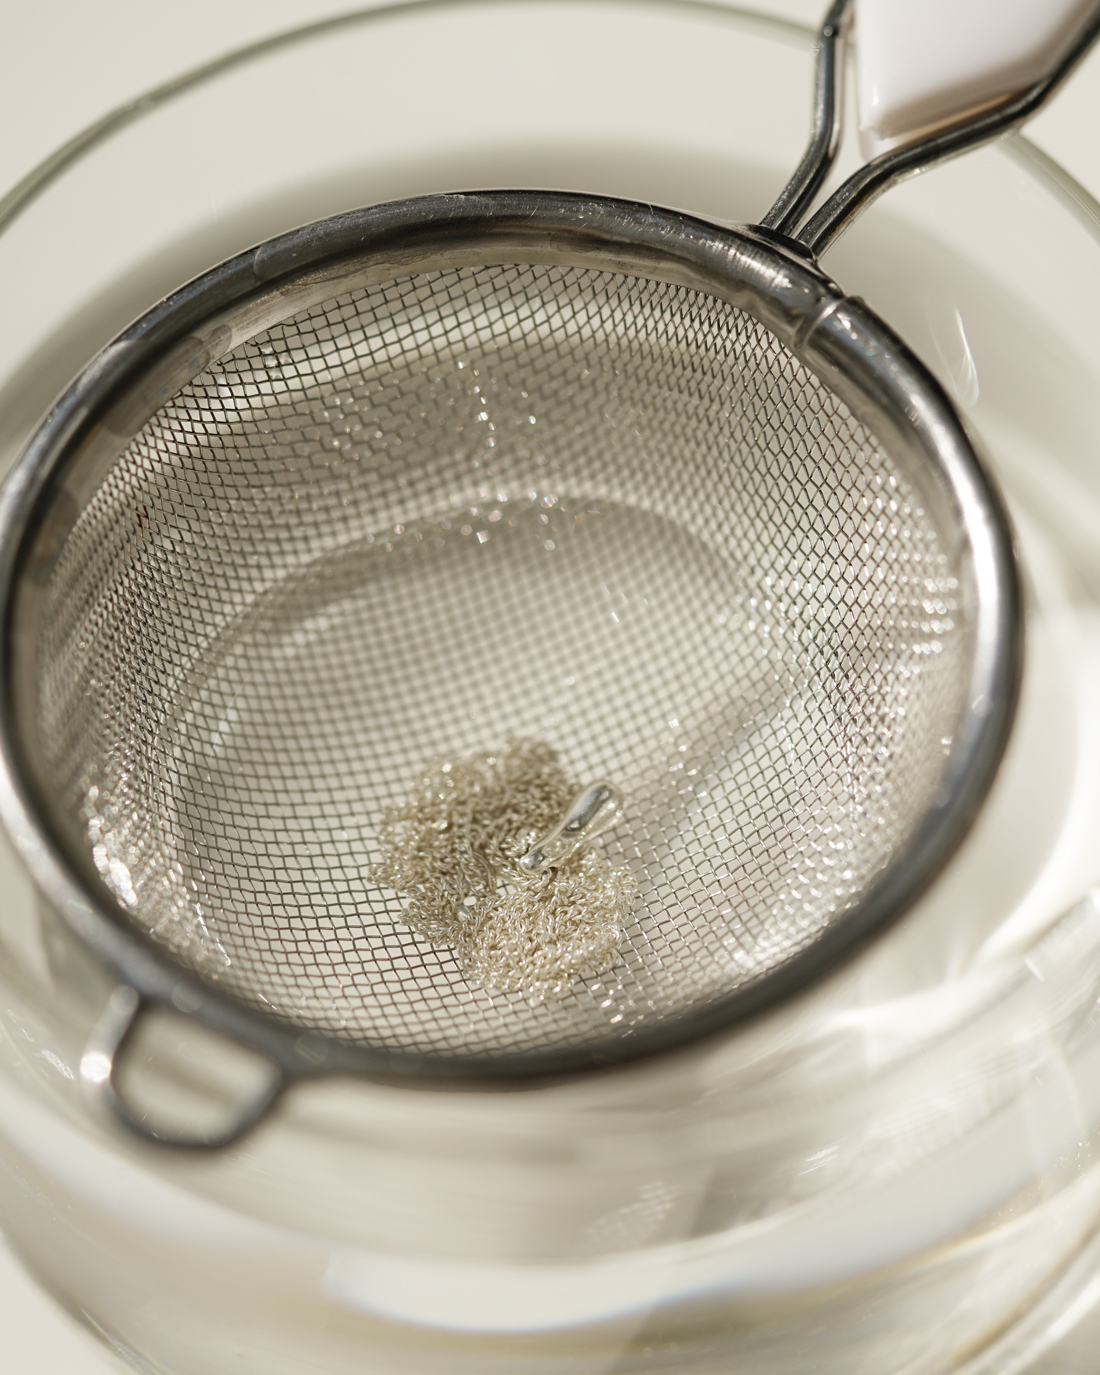 guide for cleaning silver jewellery with baking soda - nontoxic